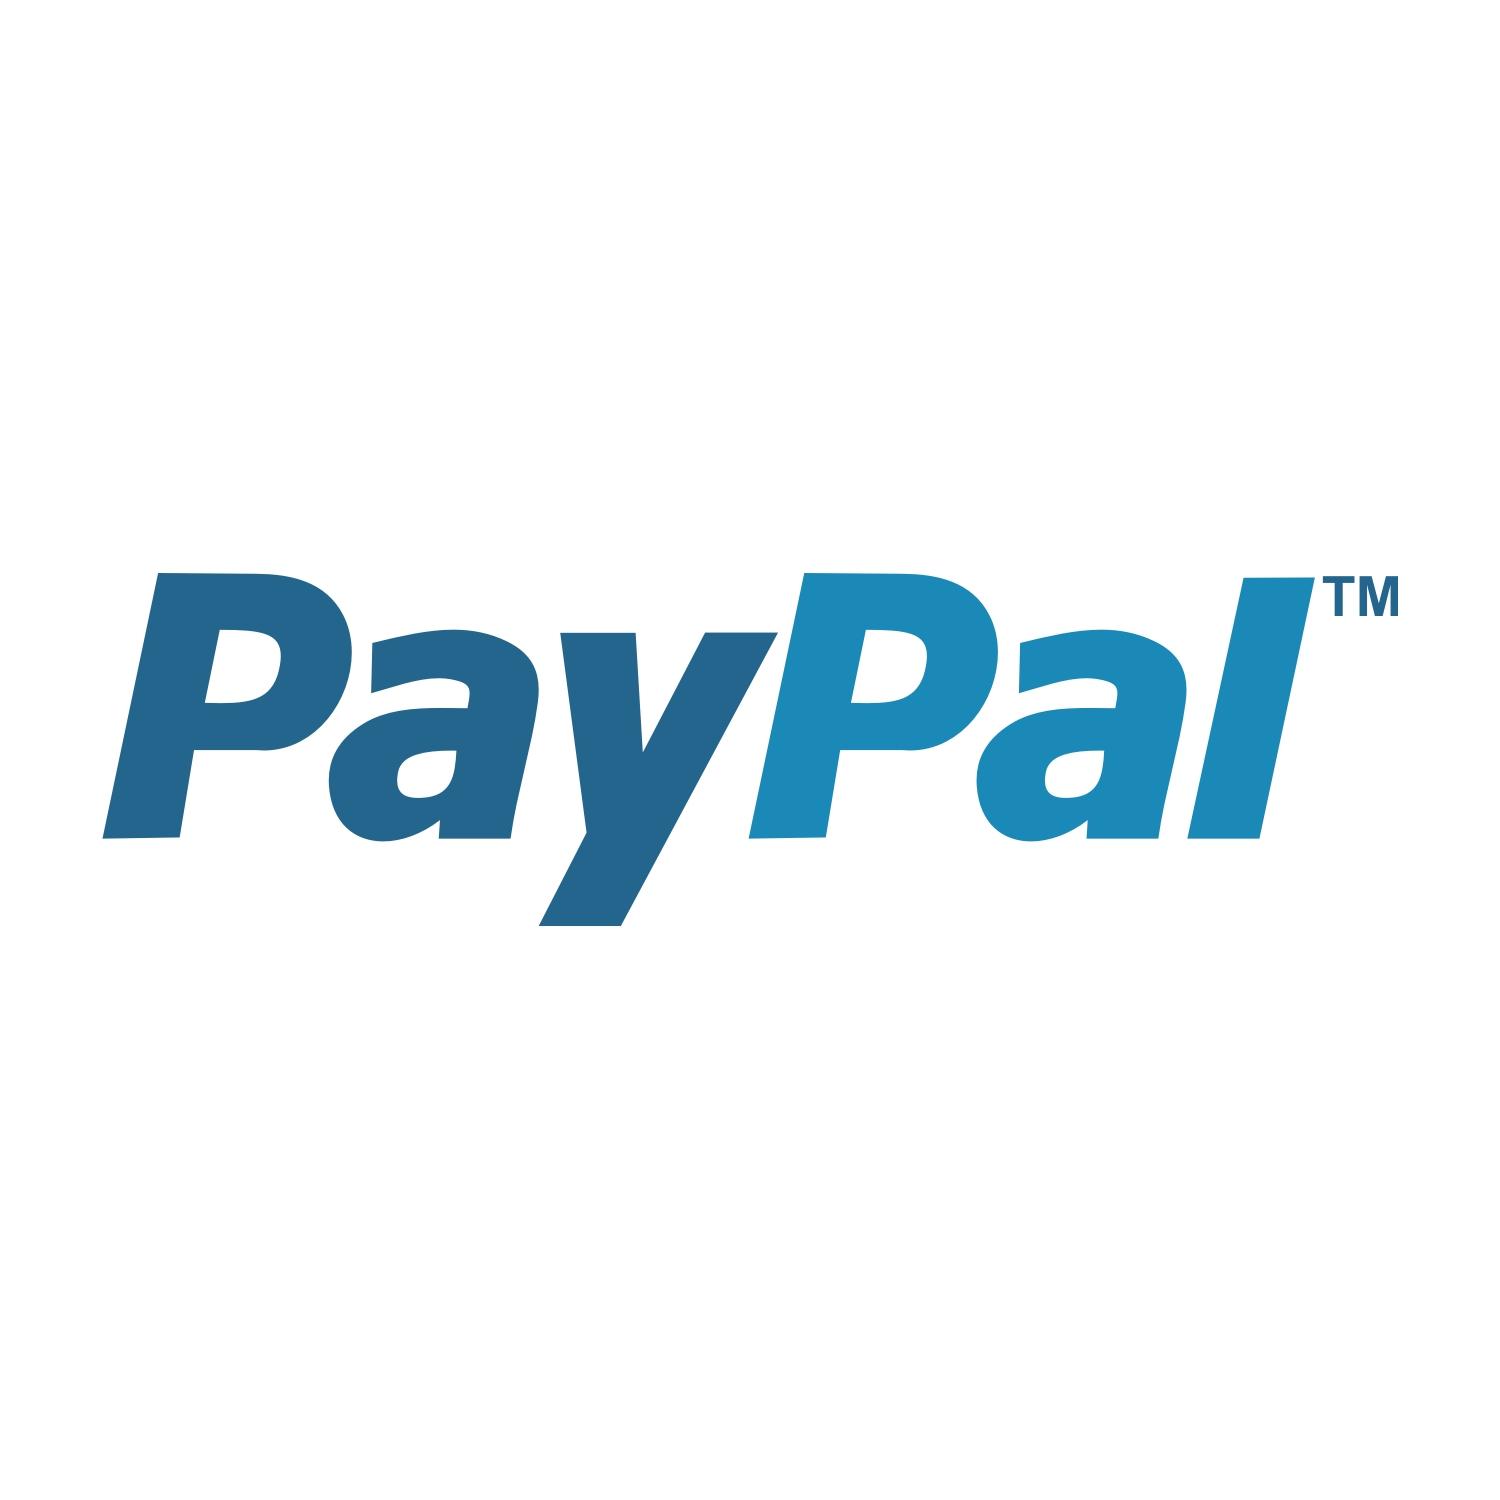 Benefits of Buying a PayPal Account with Documents Enhanced Trust and Security